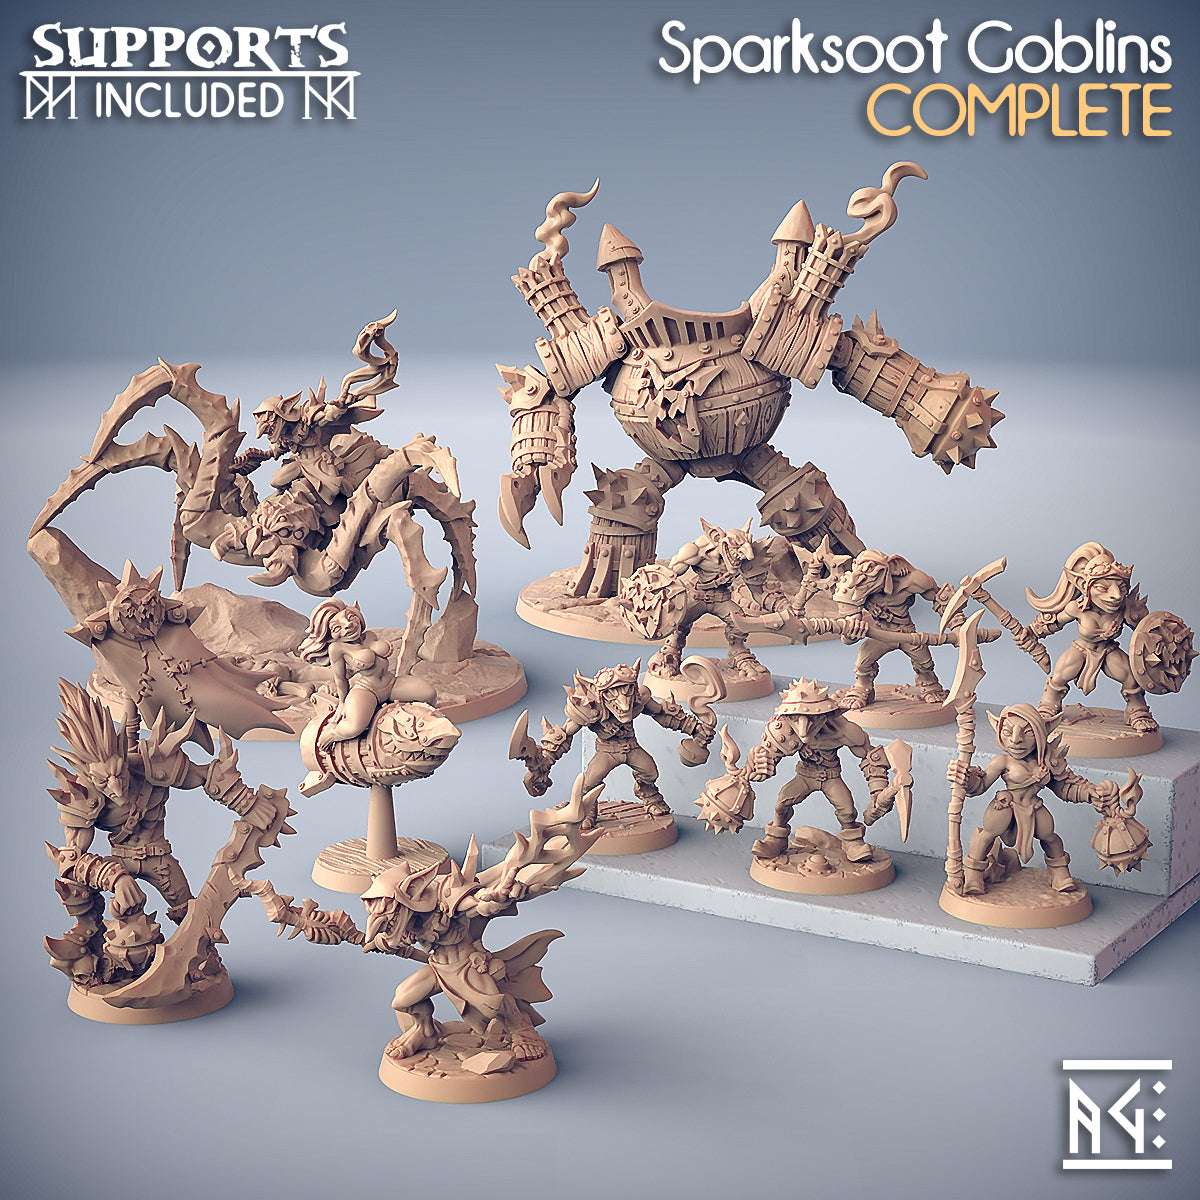 Sparksoot Goblins